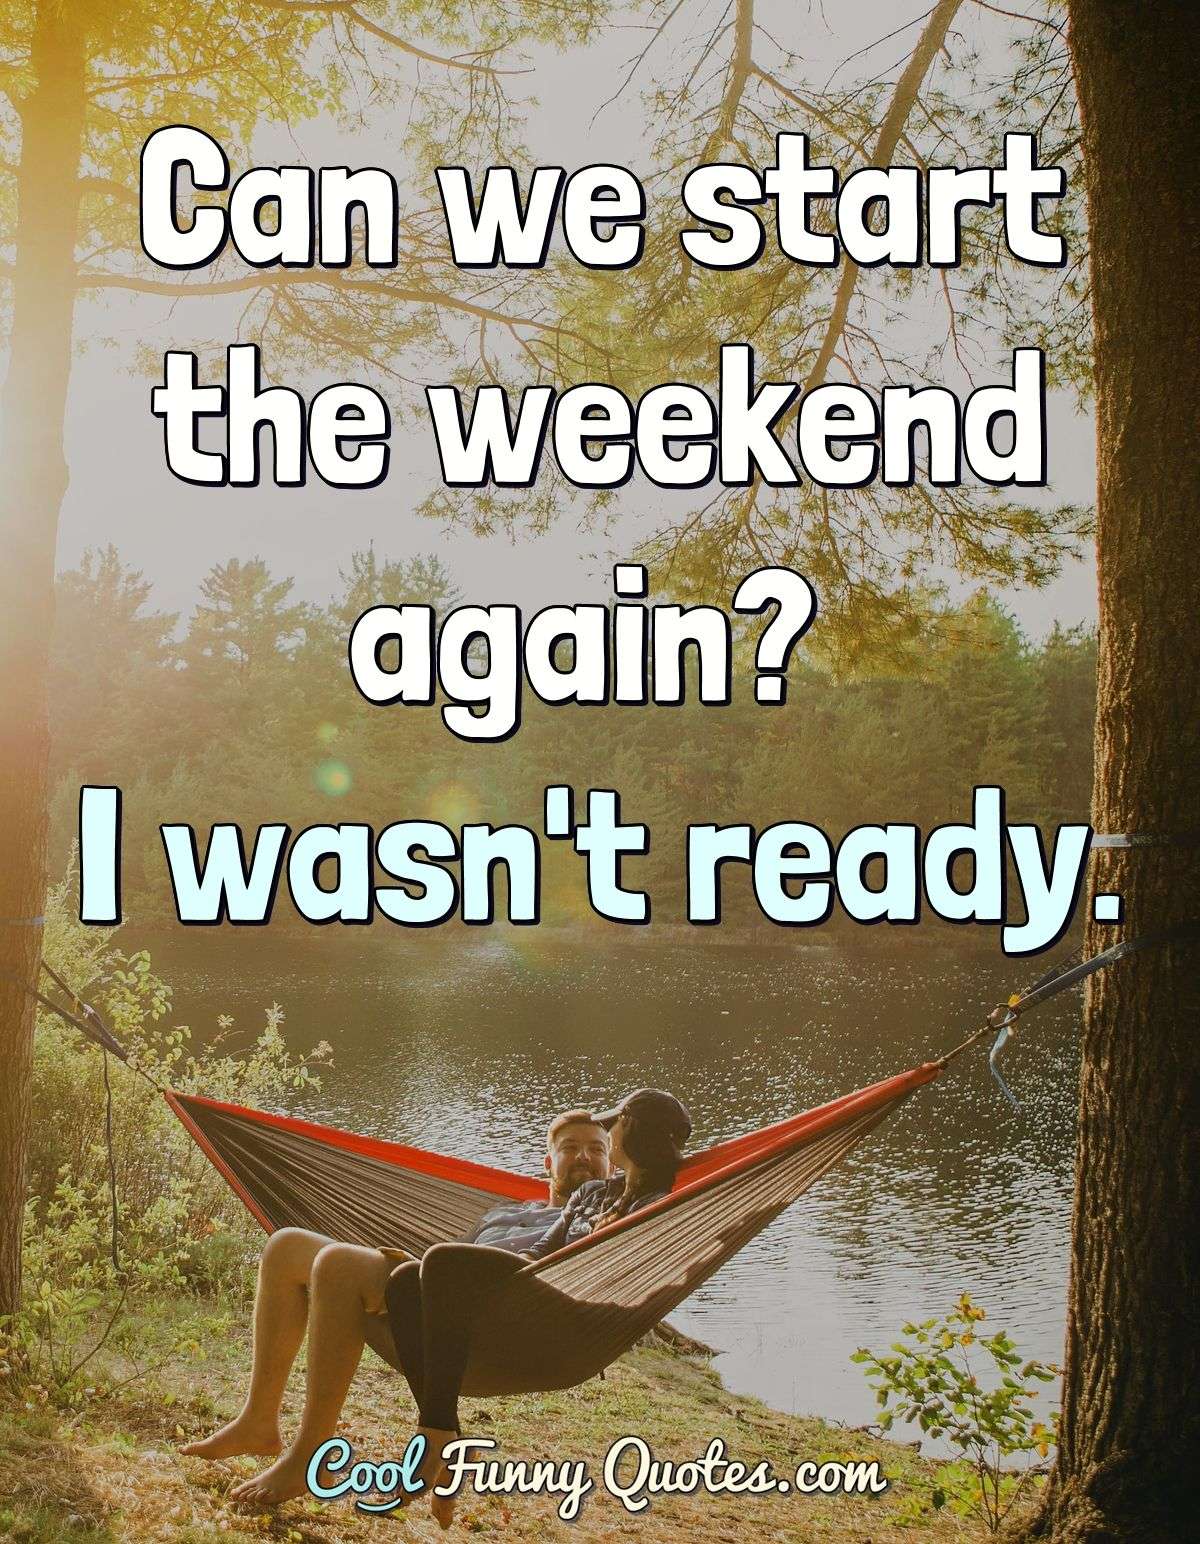 Funny weekend. Weekend is started. Country weekend quotes. Again the weekend